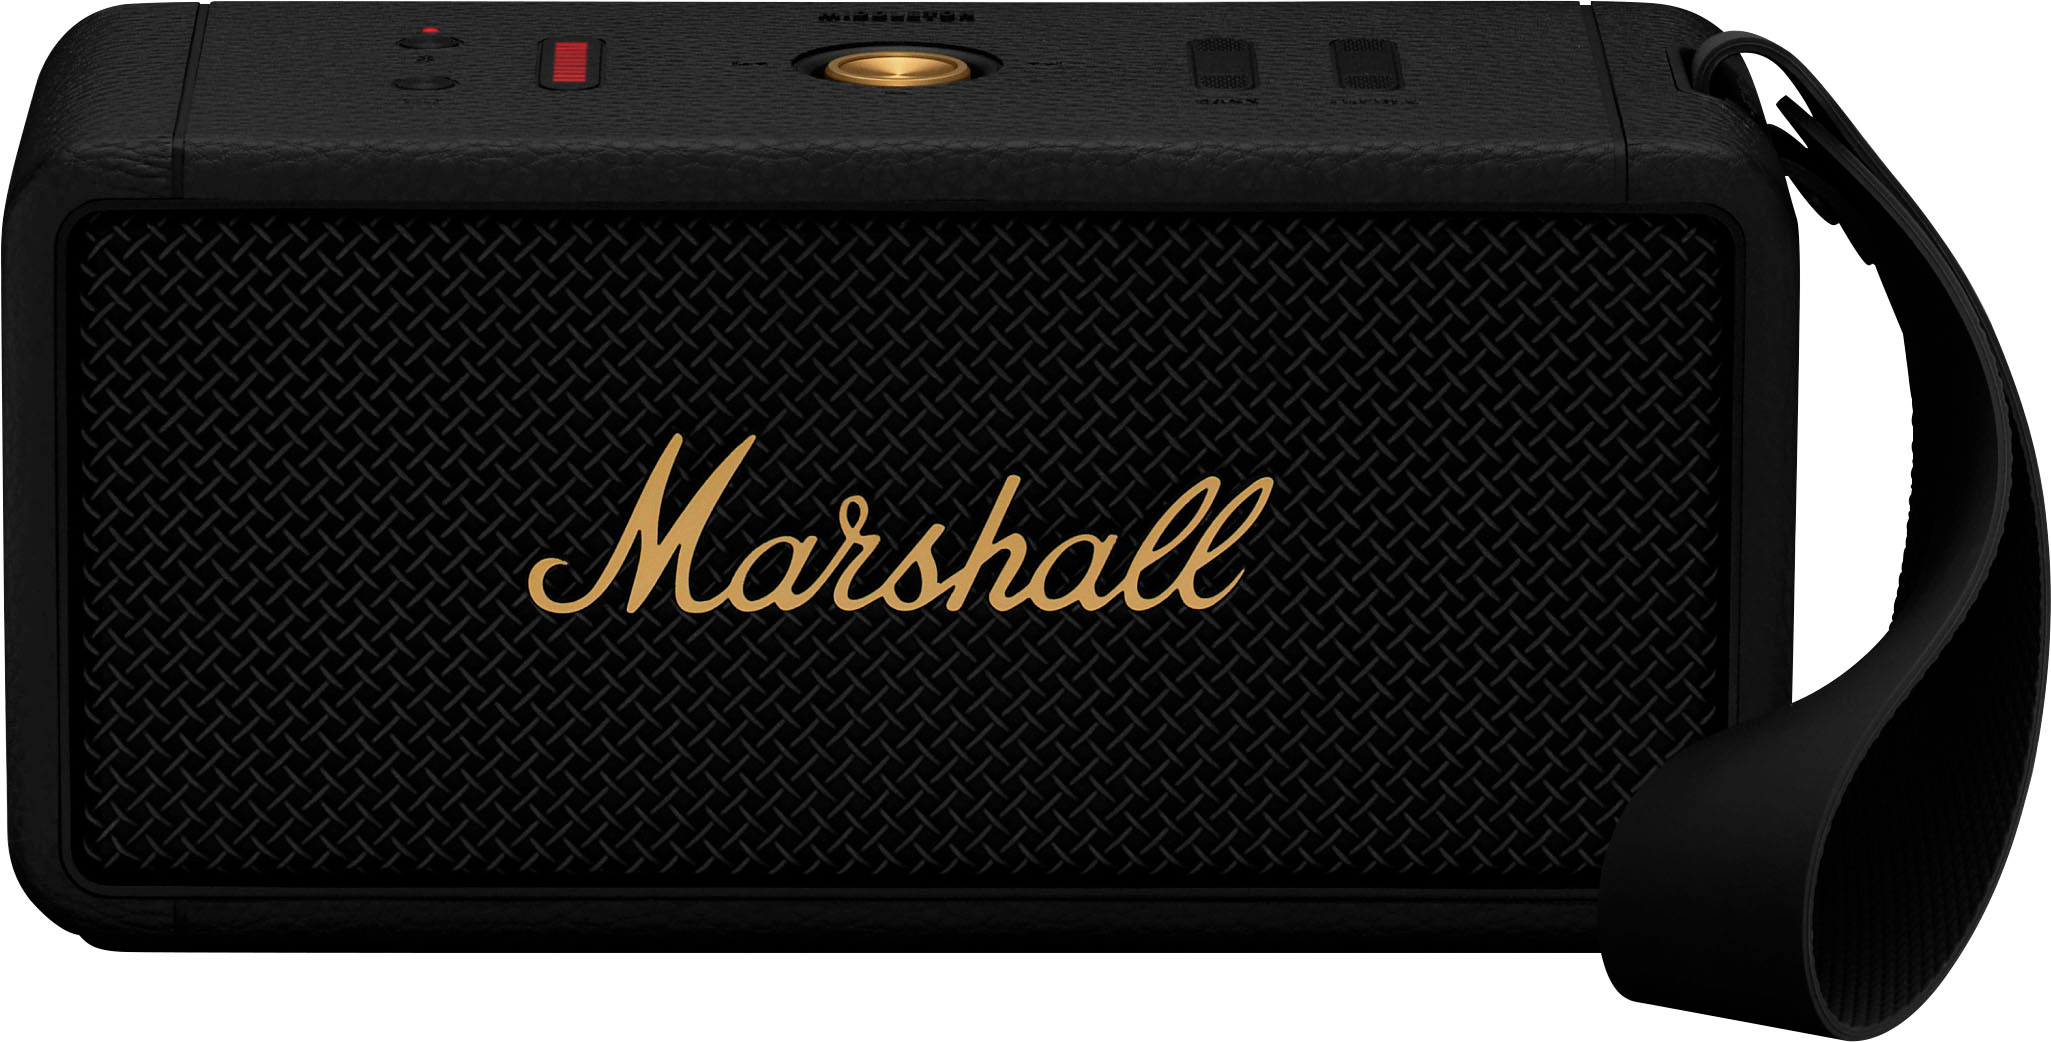 Marshall Middleton review: a jack of all trades but a master of